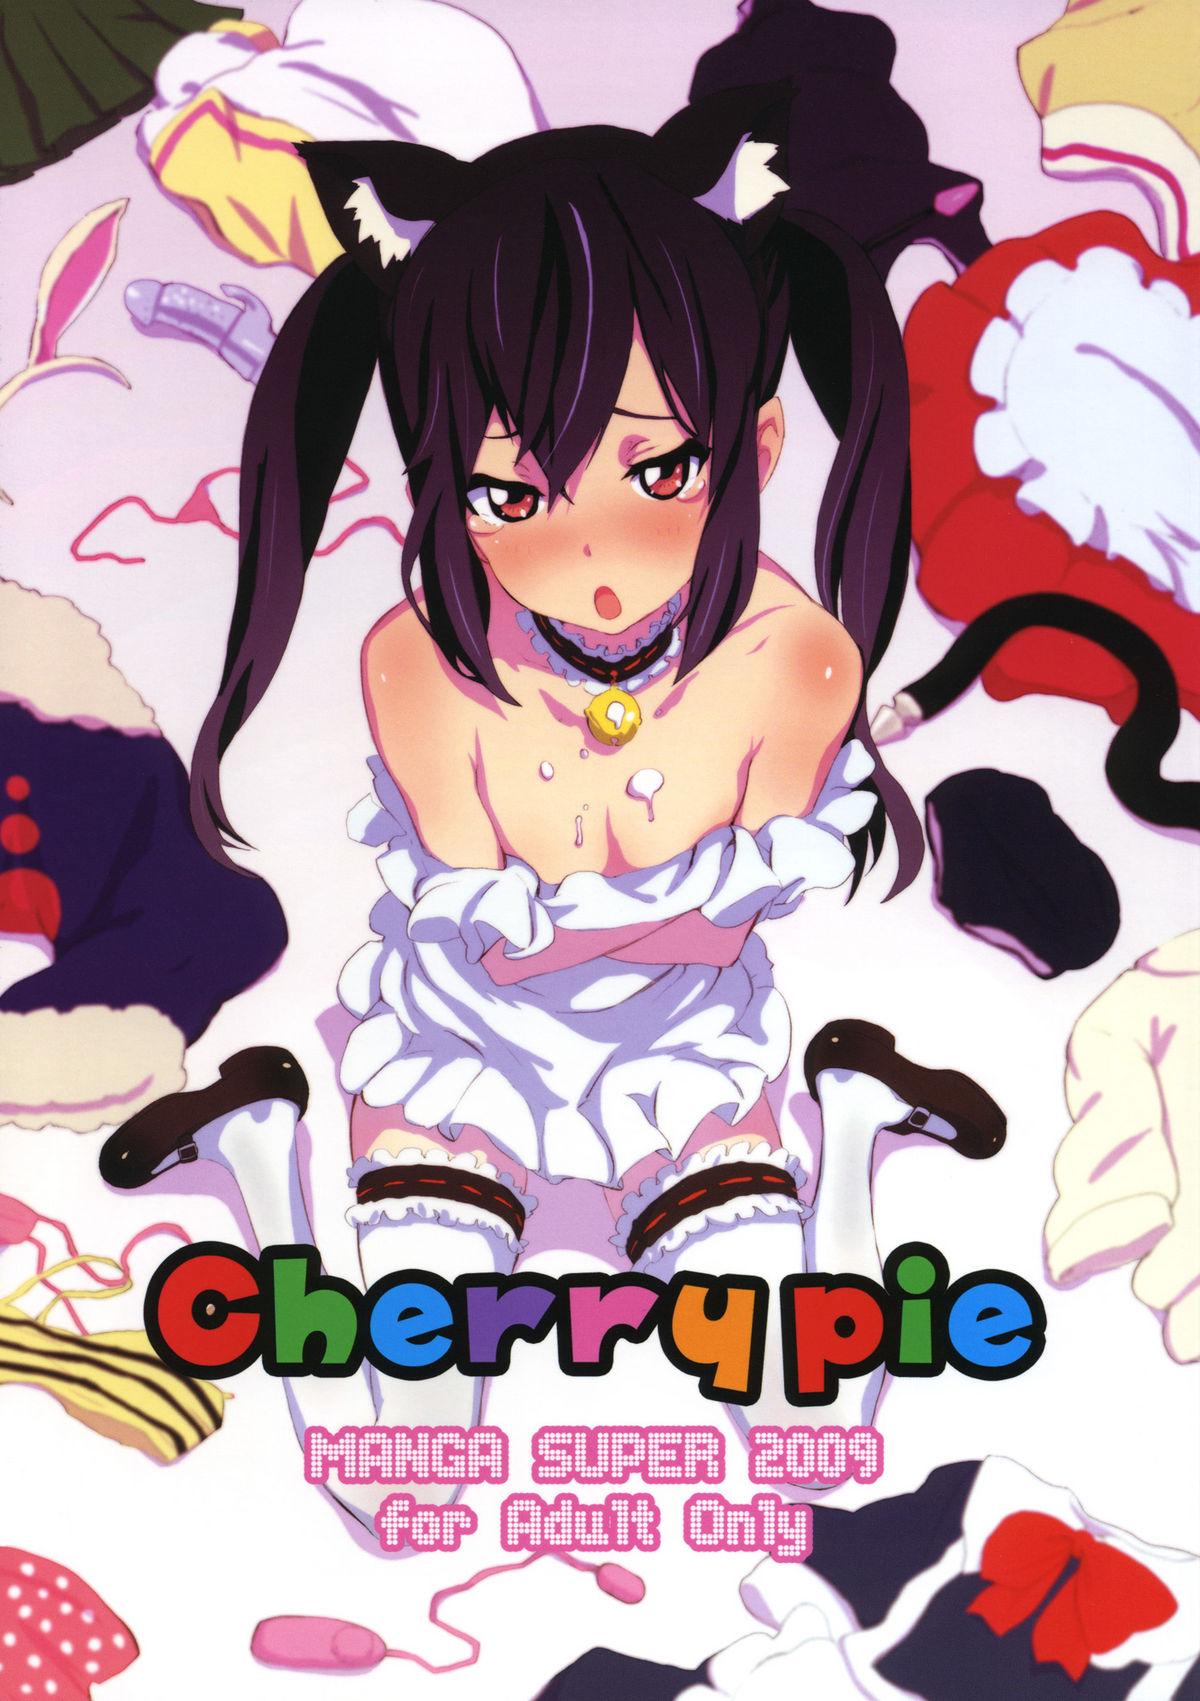 Culos Cherry pie - K-on Workout - Picture 1